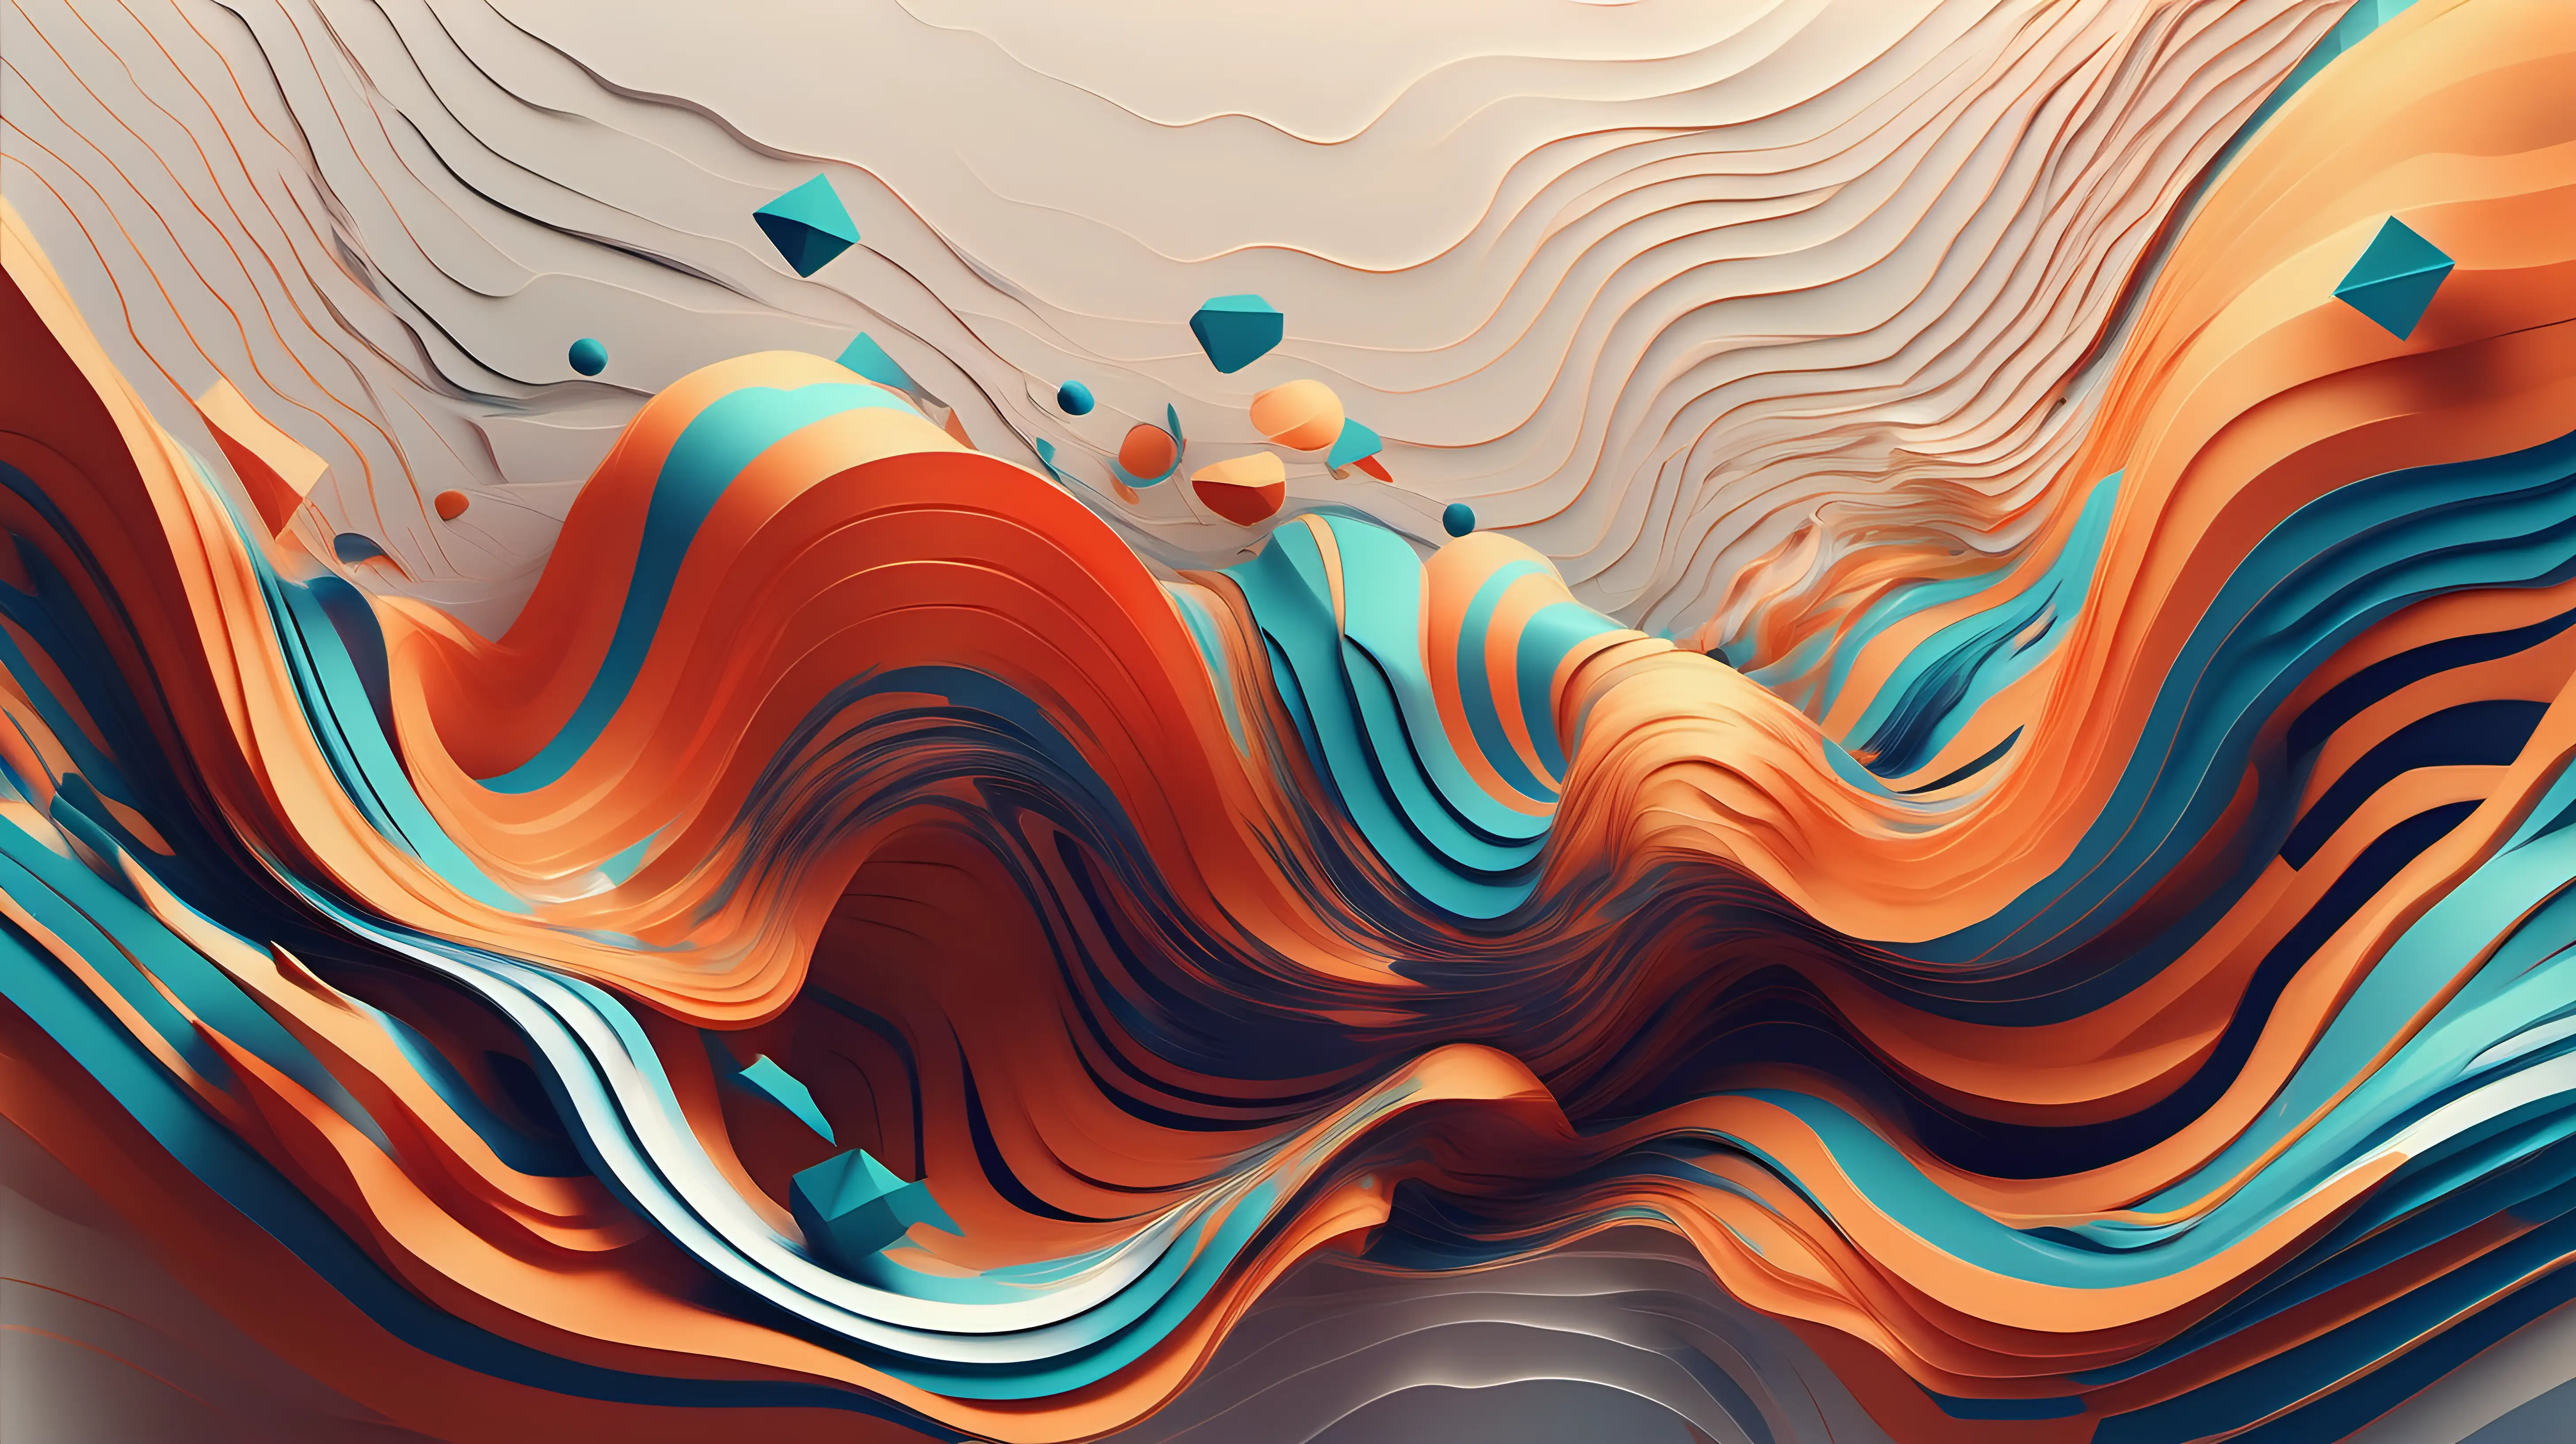 Dynamic Fluid Dynamics Abstract Art with Geometric Shapes